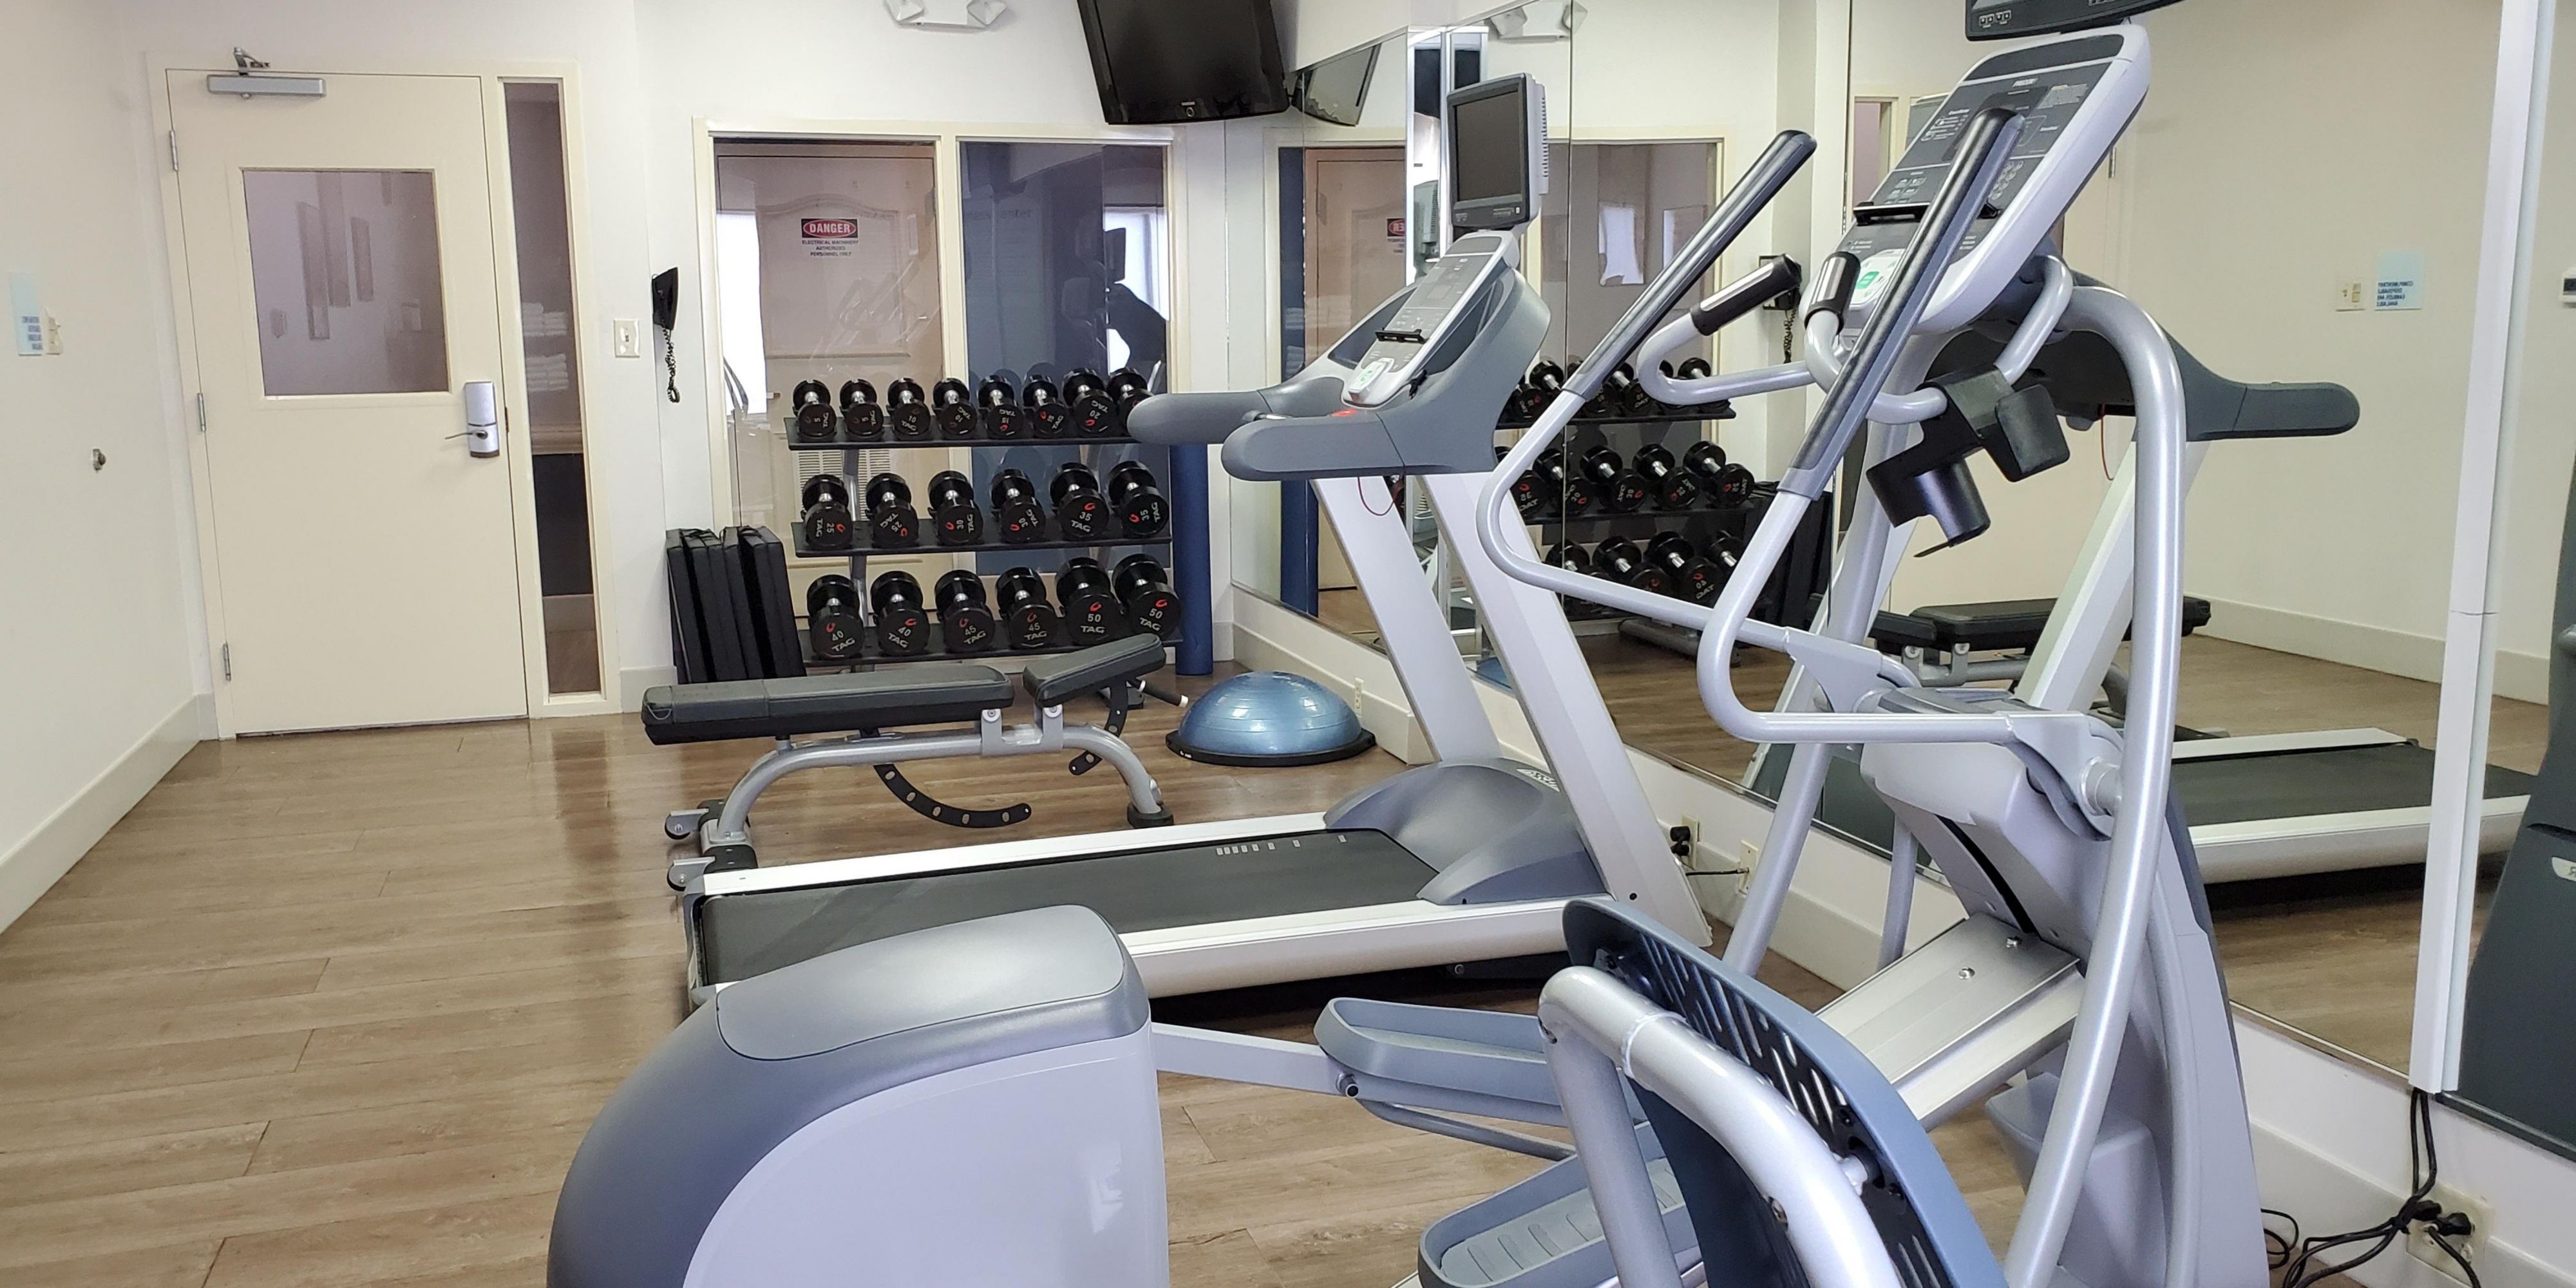 Our 24-hour, key access fitness center has a variety of top-of-the-line equipment for our hotel guests. Conveniently located on the ground floor of the hotel and well stocked with fresh, clean towels, a water cooler, and sanitizing products.
